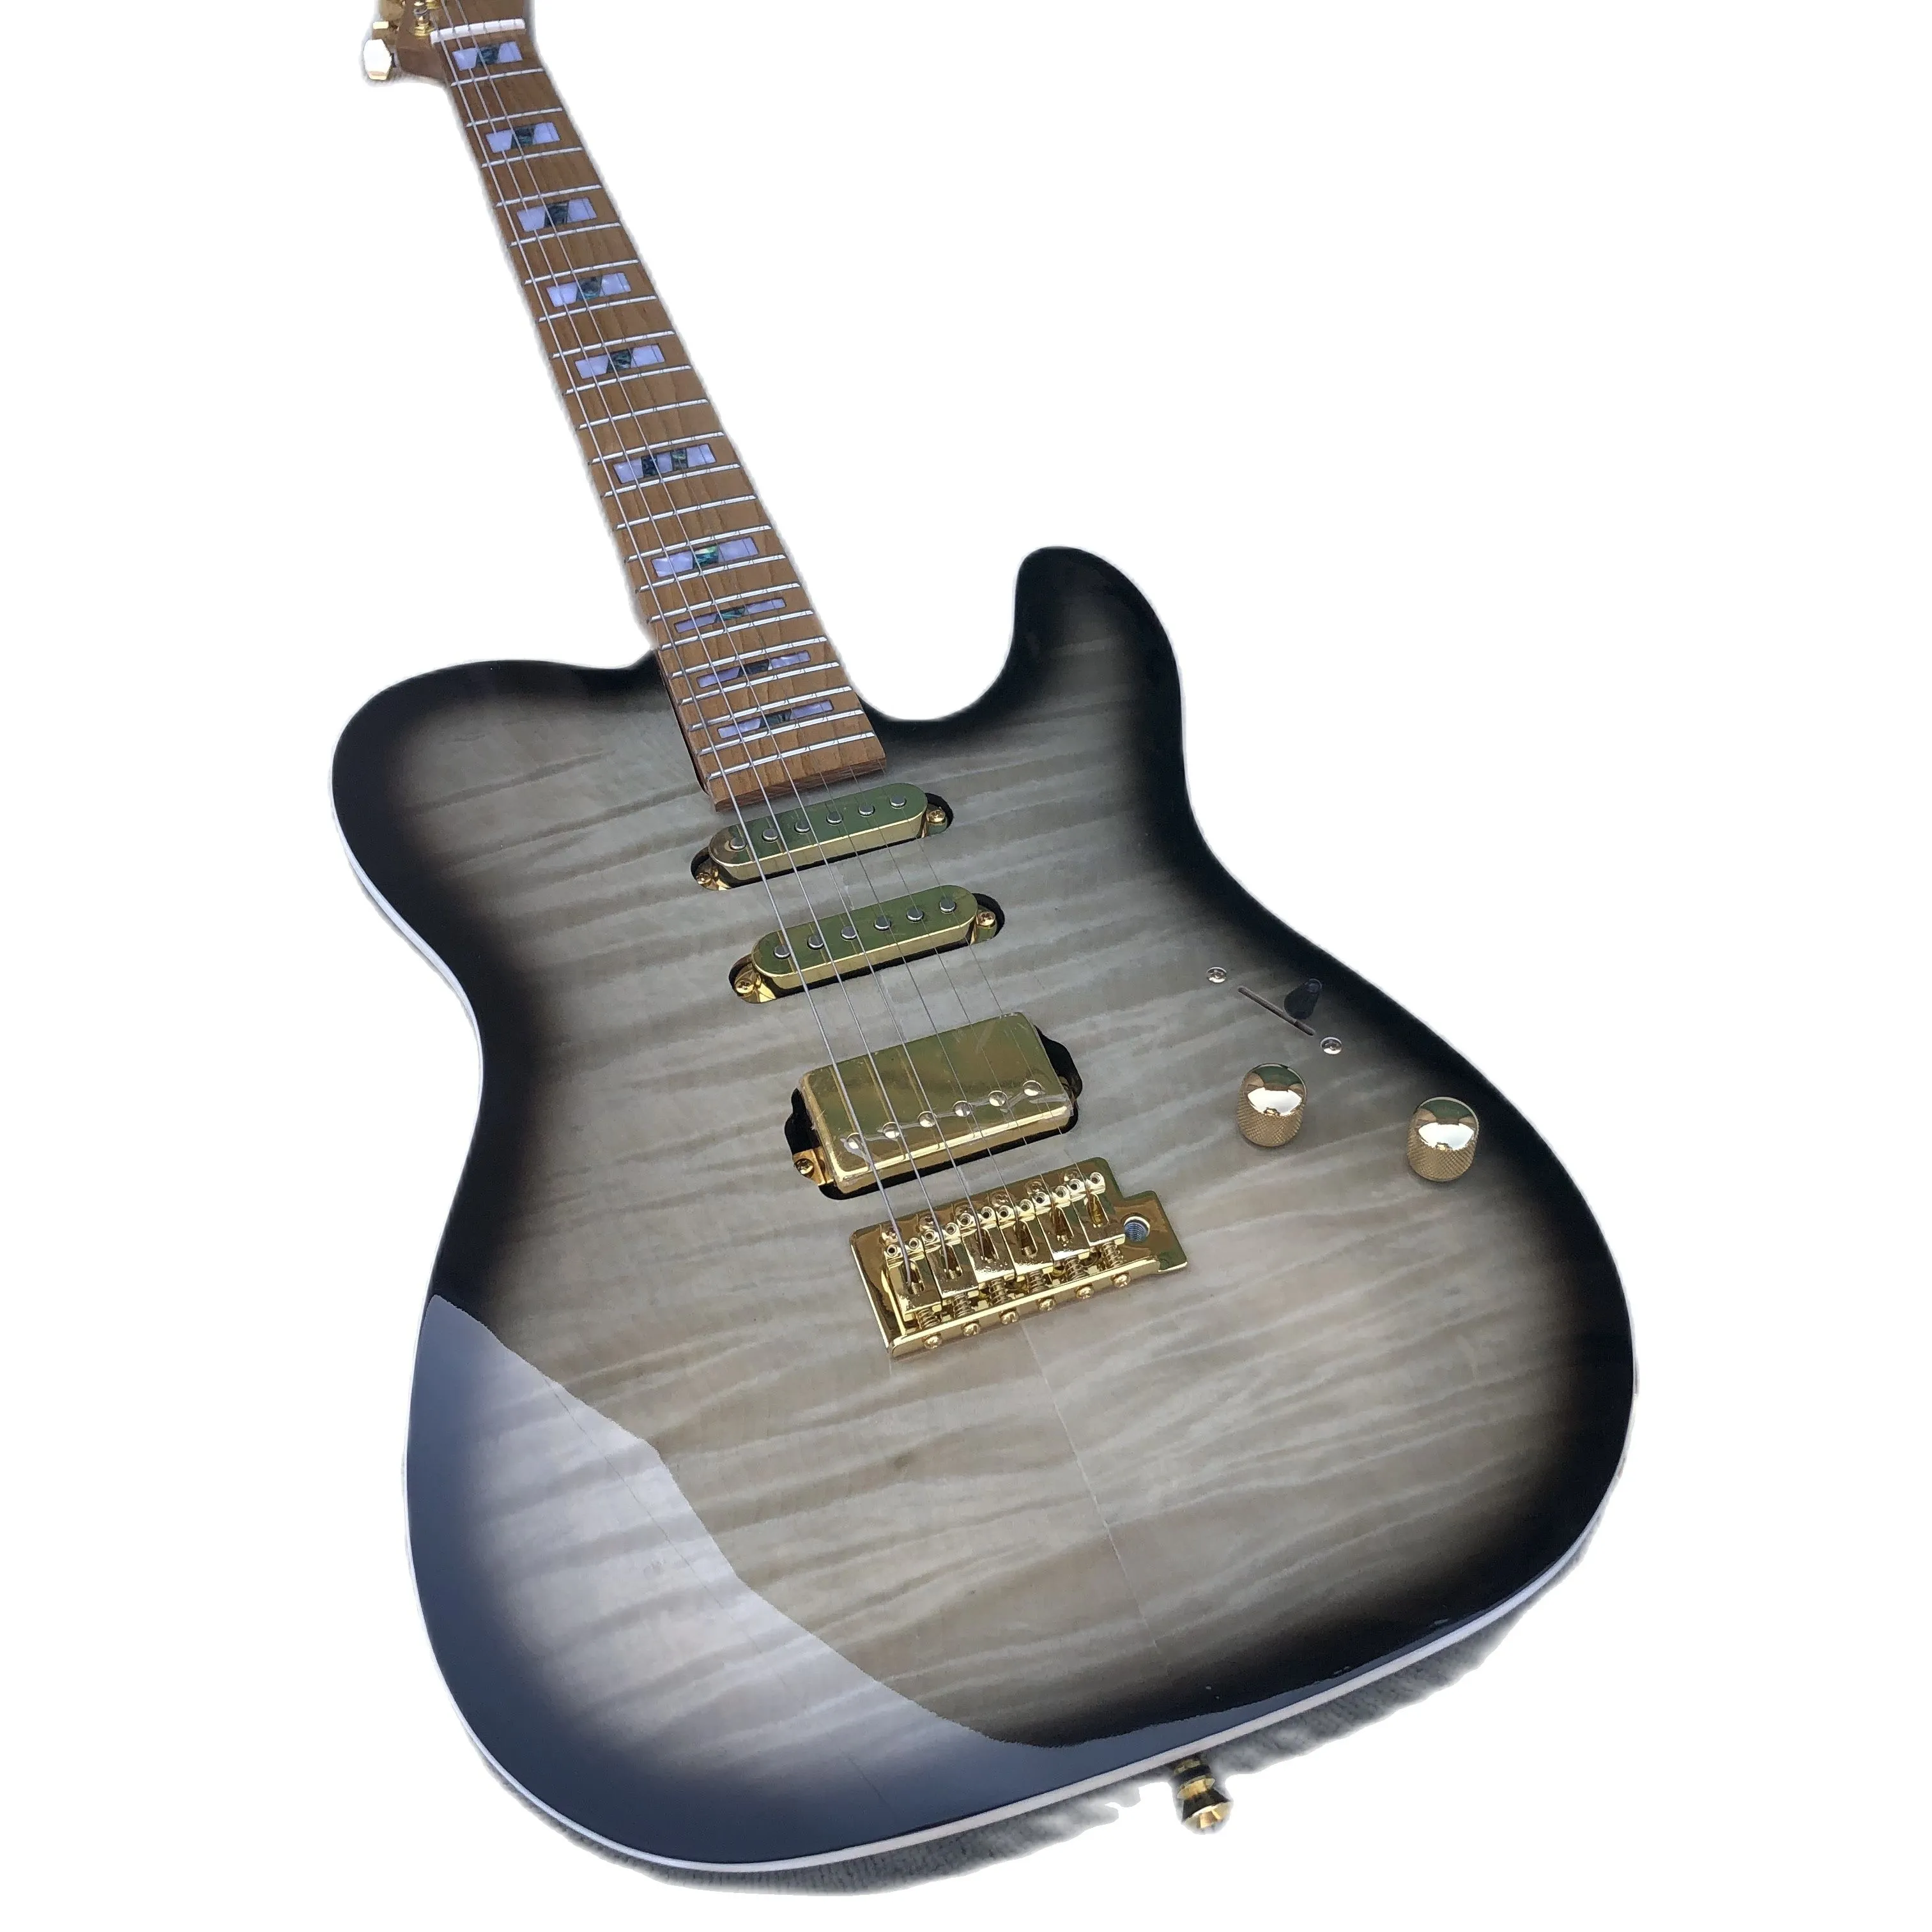 New Arrival 6-String Electric Guitar,Transparent Paint,Charcoal Maple Neck, Abalone Inlay,Tiger Maple Vene